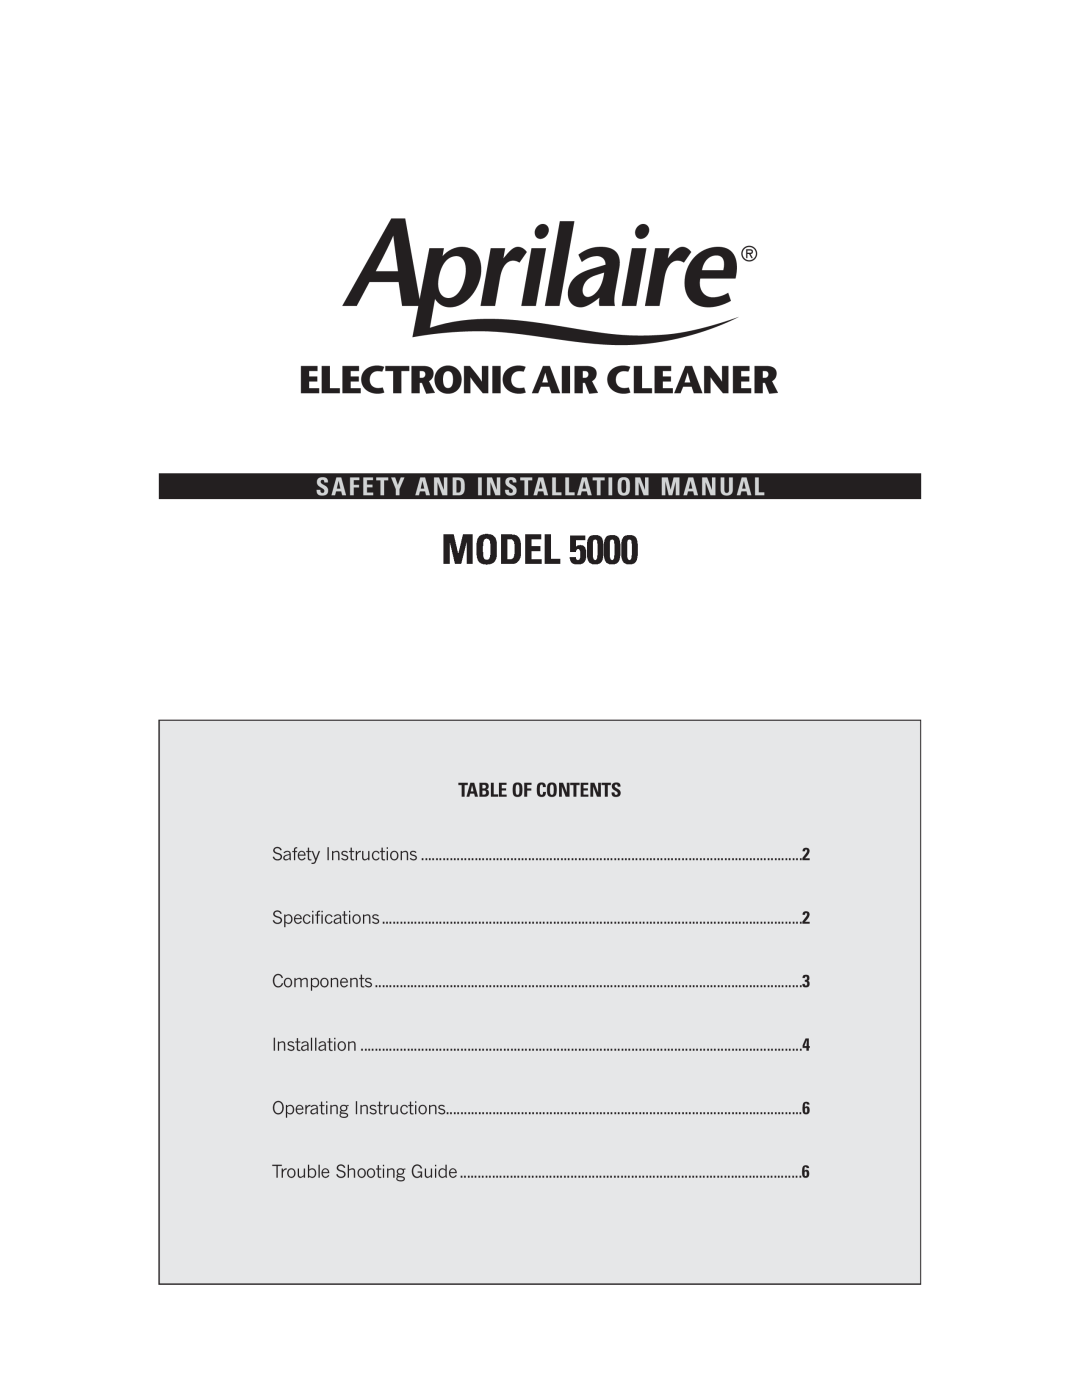 Aprilaire installation instructions Safety Instructions, Table of Contents, Model 5000 Electronic Air Cleaner 